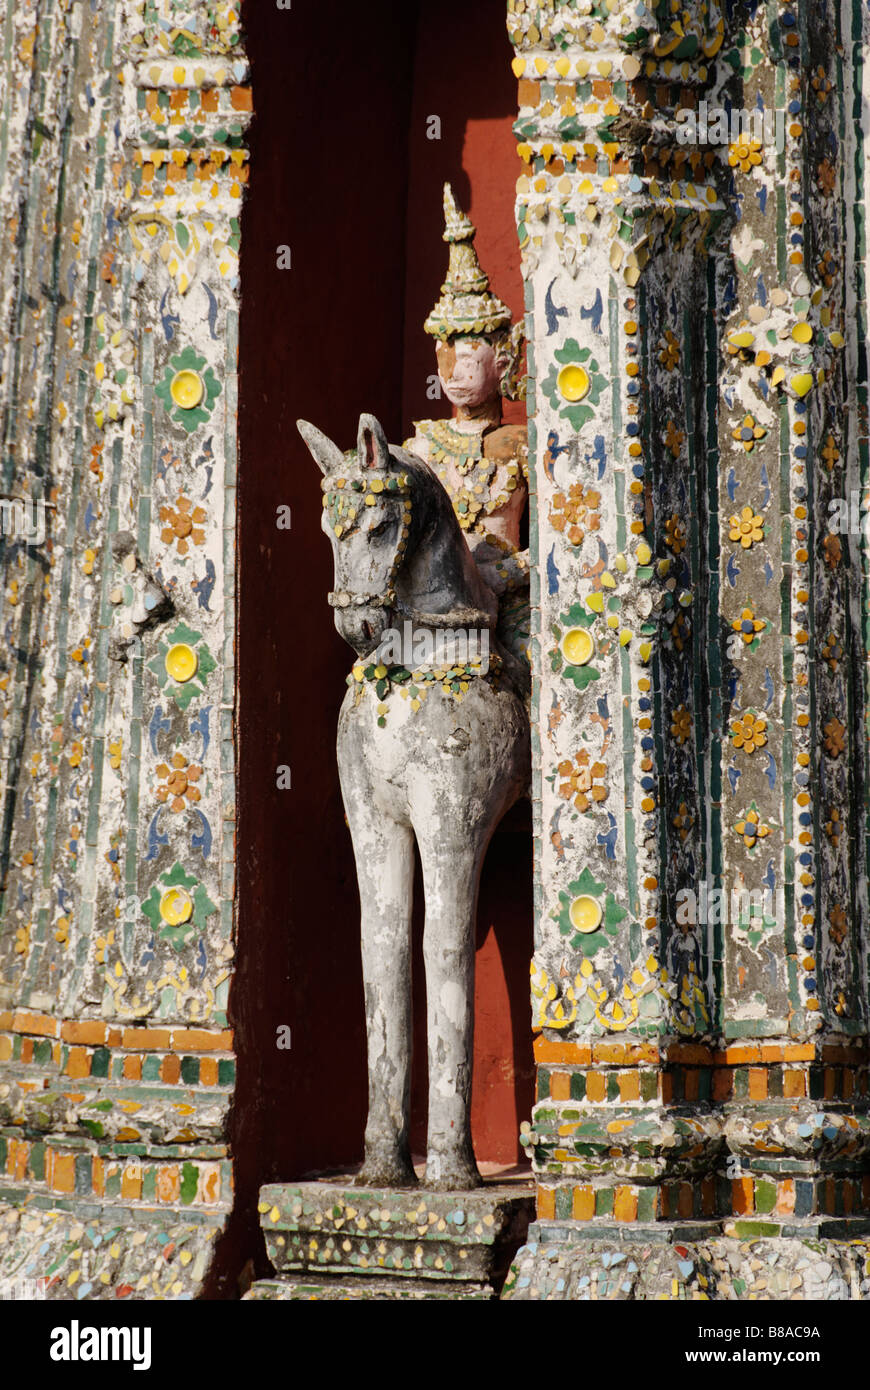 Detail of ceramic tiles and equestrian statue - Wat Arun buddhist temple in Bangkok. Thailand Stock Photo